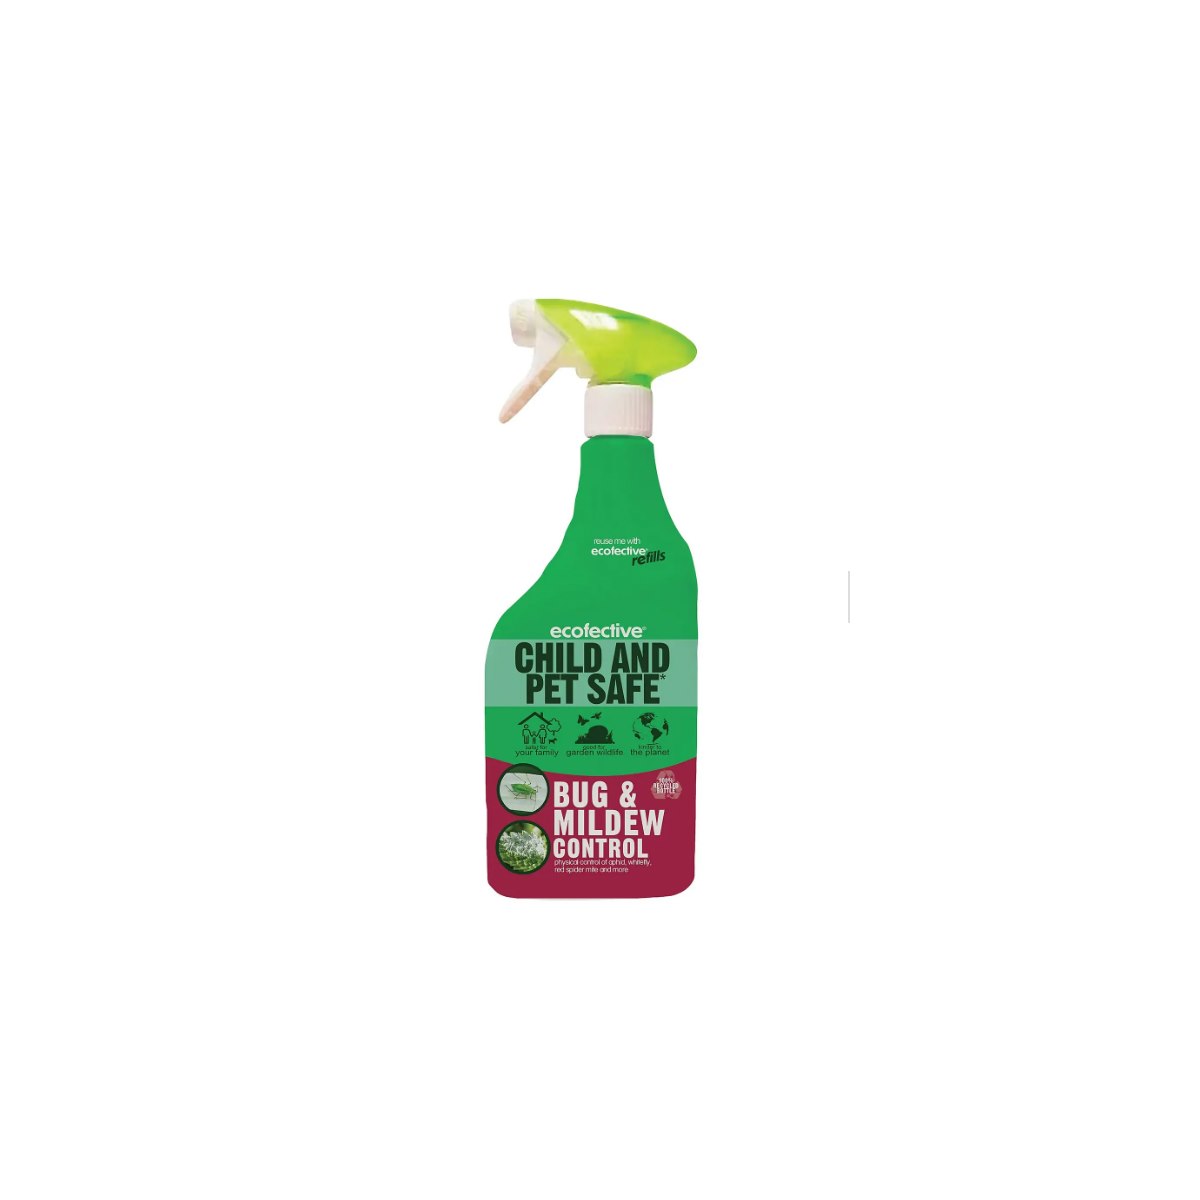  Ecofective Child and Pet Safe Bug and Mildew Control Spay 1 Litre 